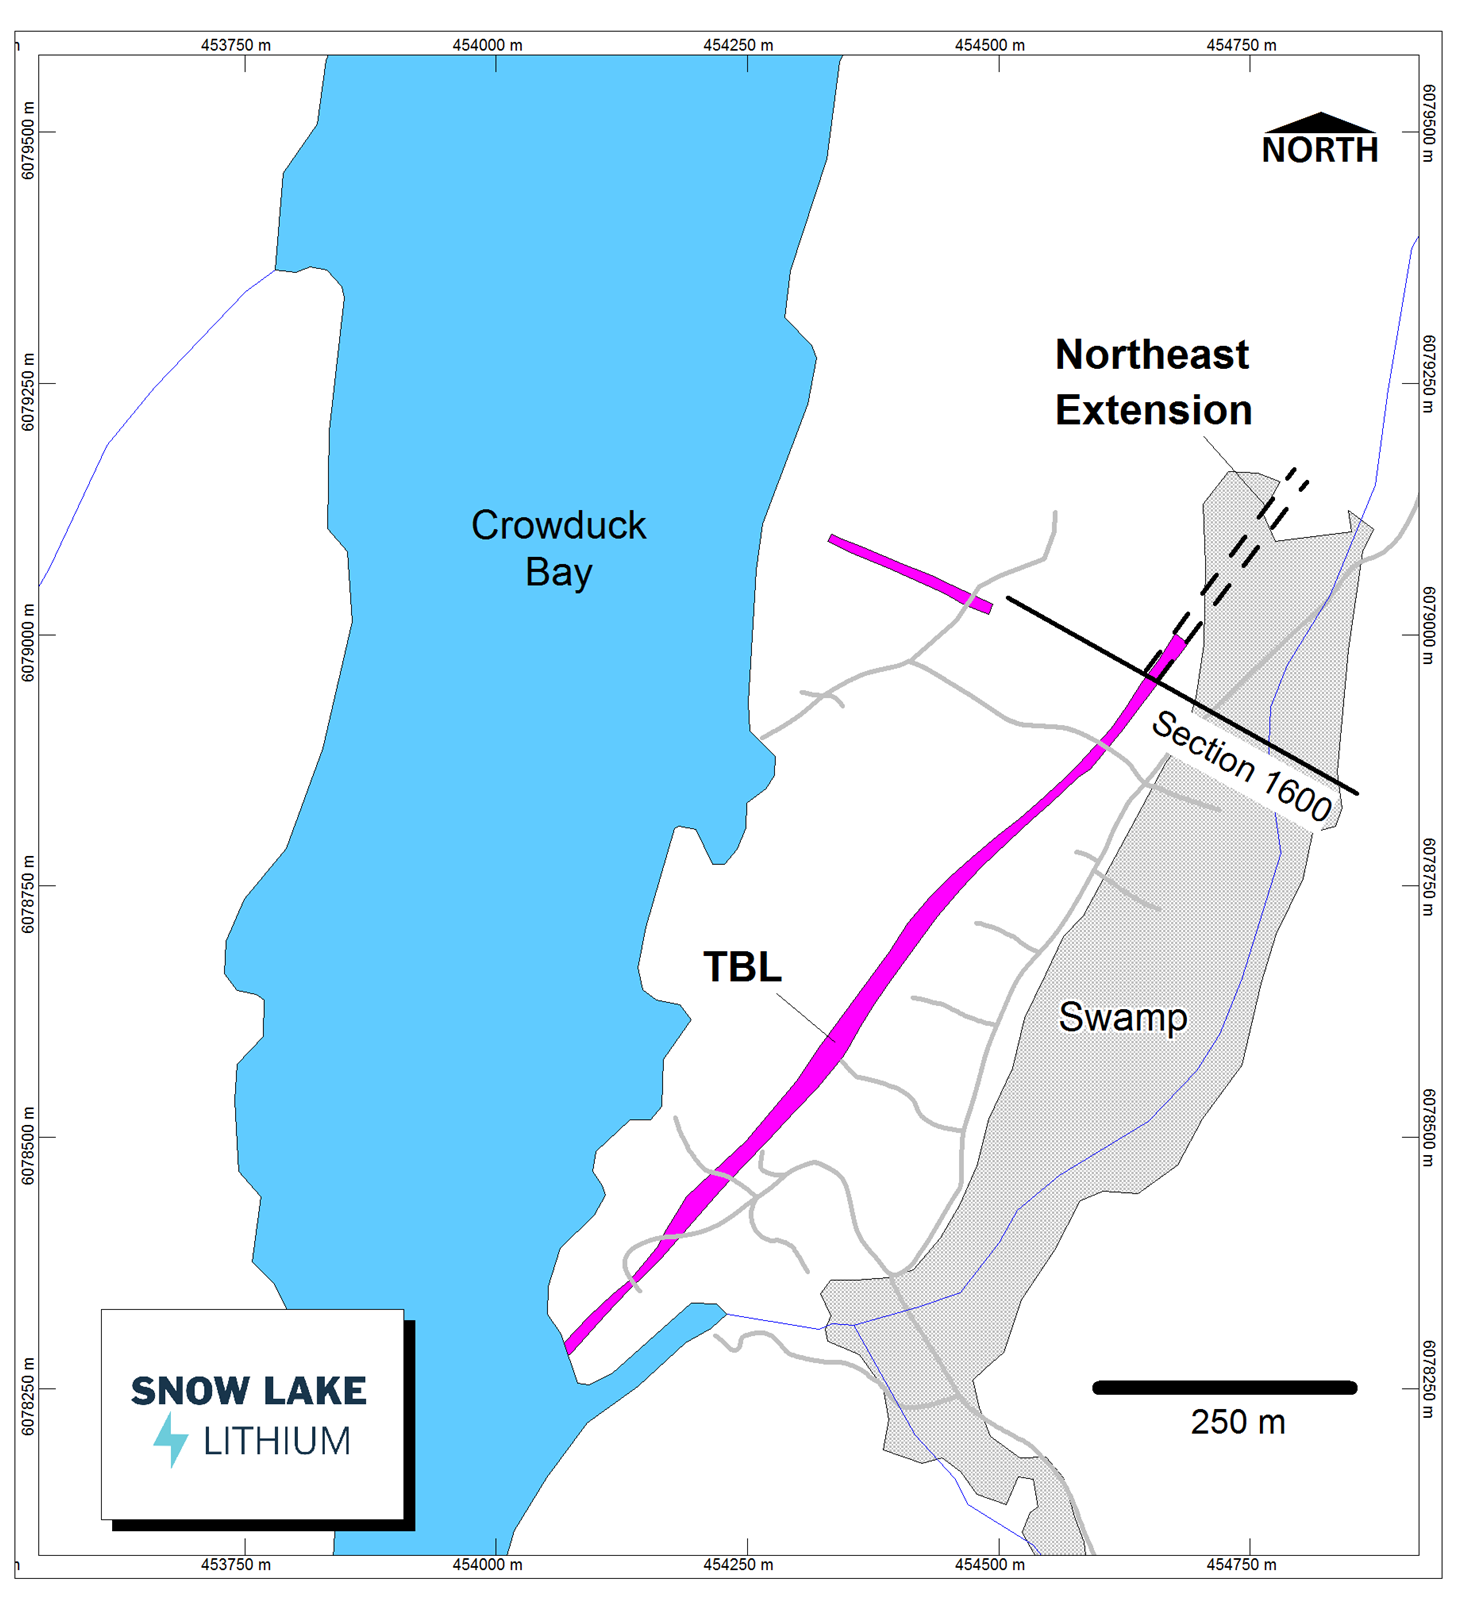 Snow Lake Resources Ltd., Monday, May 2, 2022, Press release picture